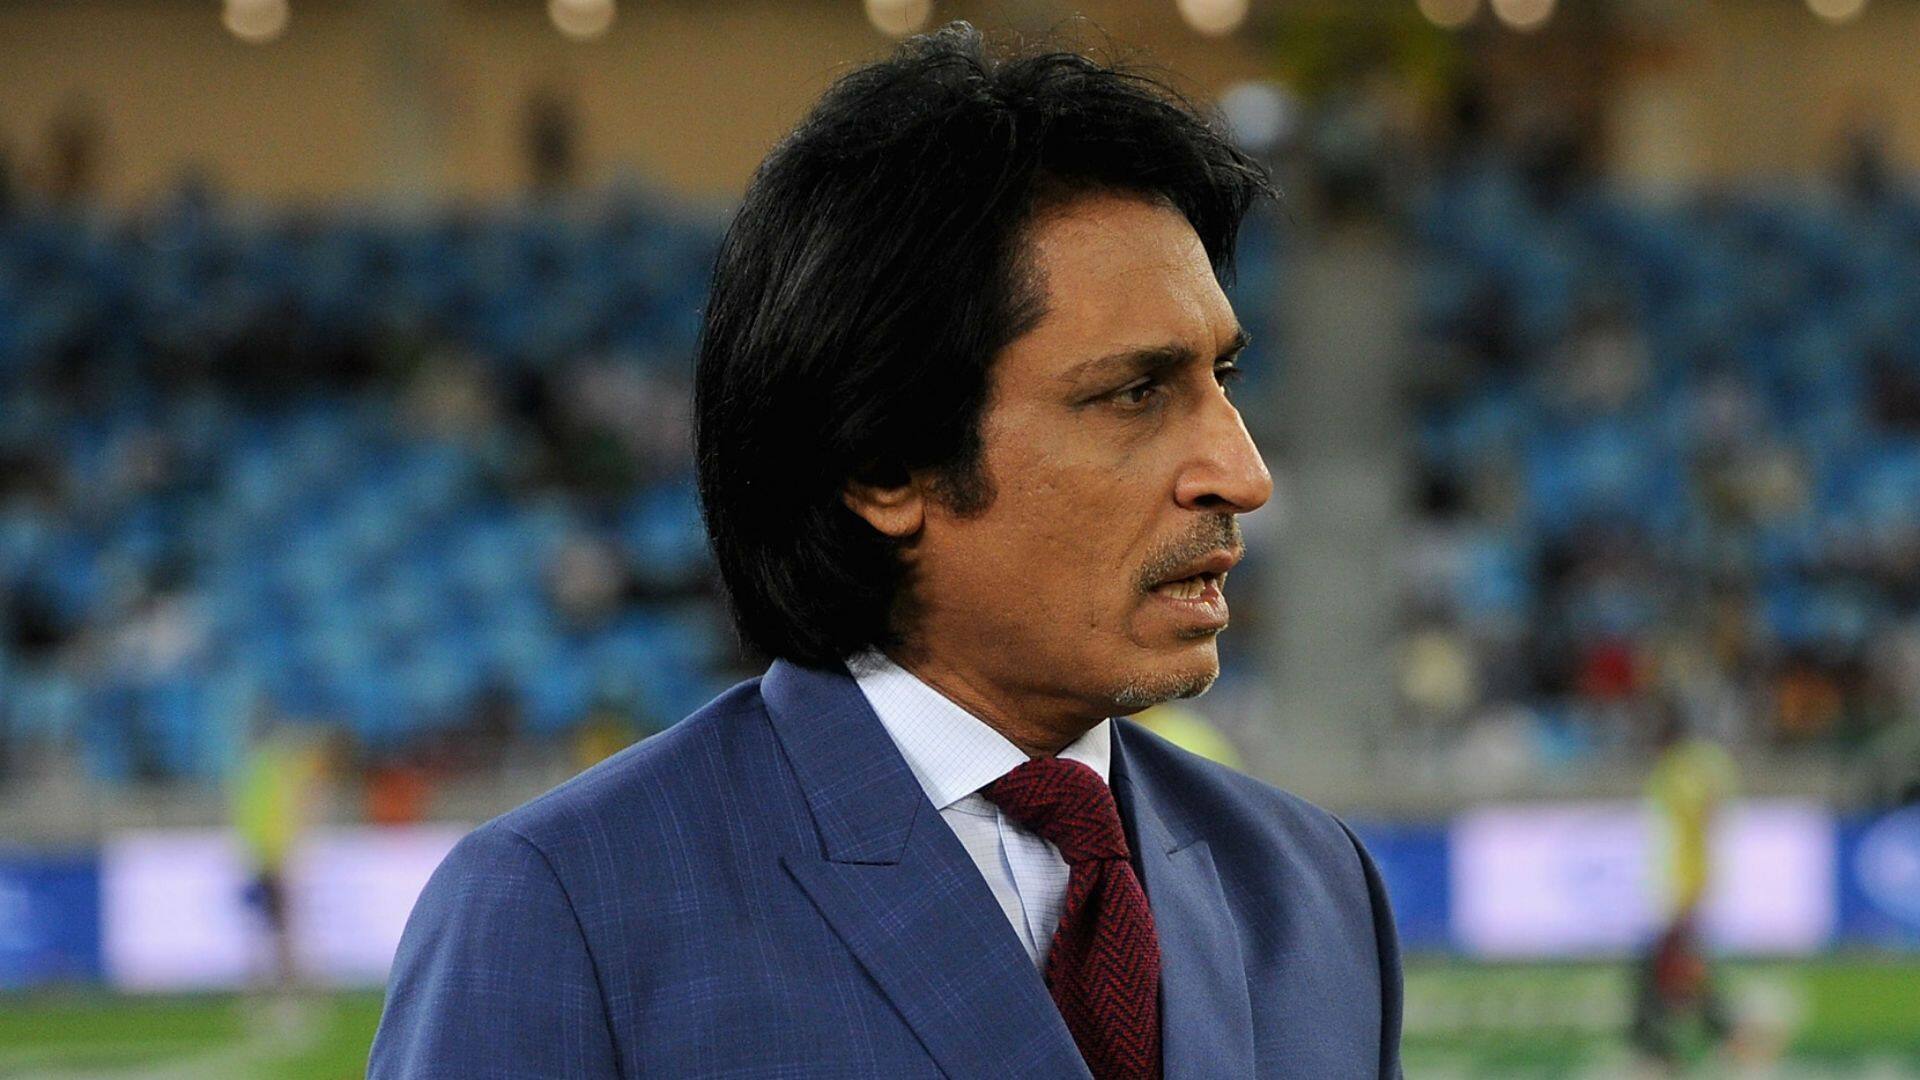 'Game Can Be Cruel And Unfair'- Ramiz Raja after Pakistan's loss to India